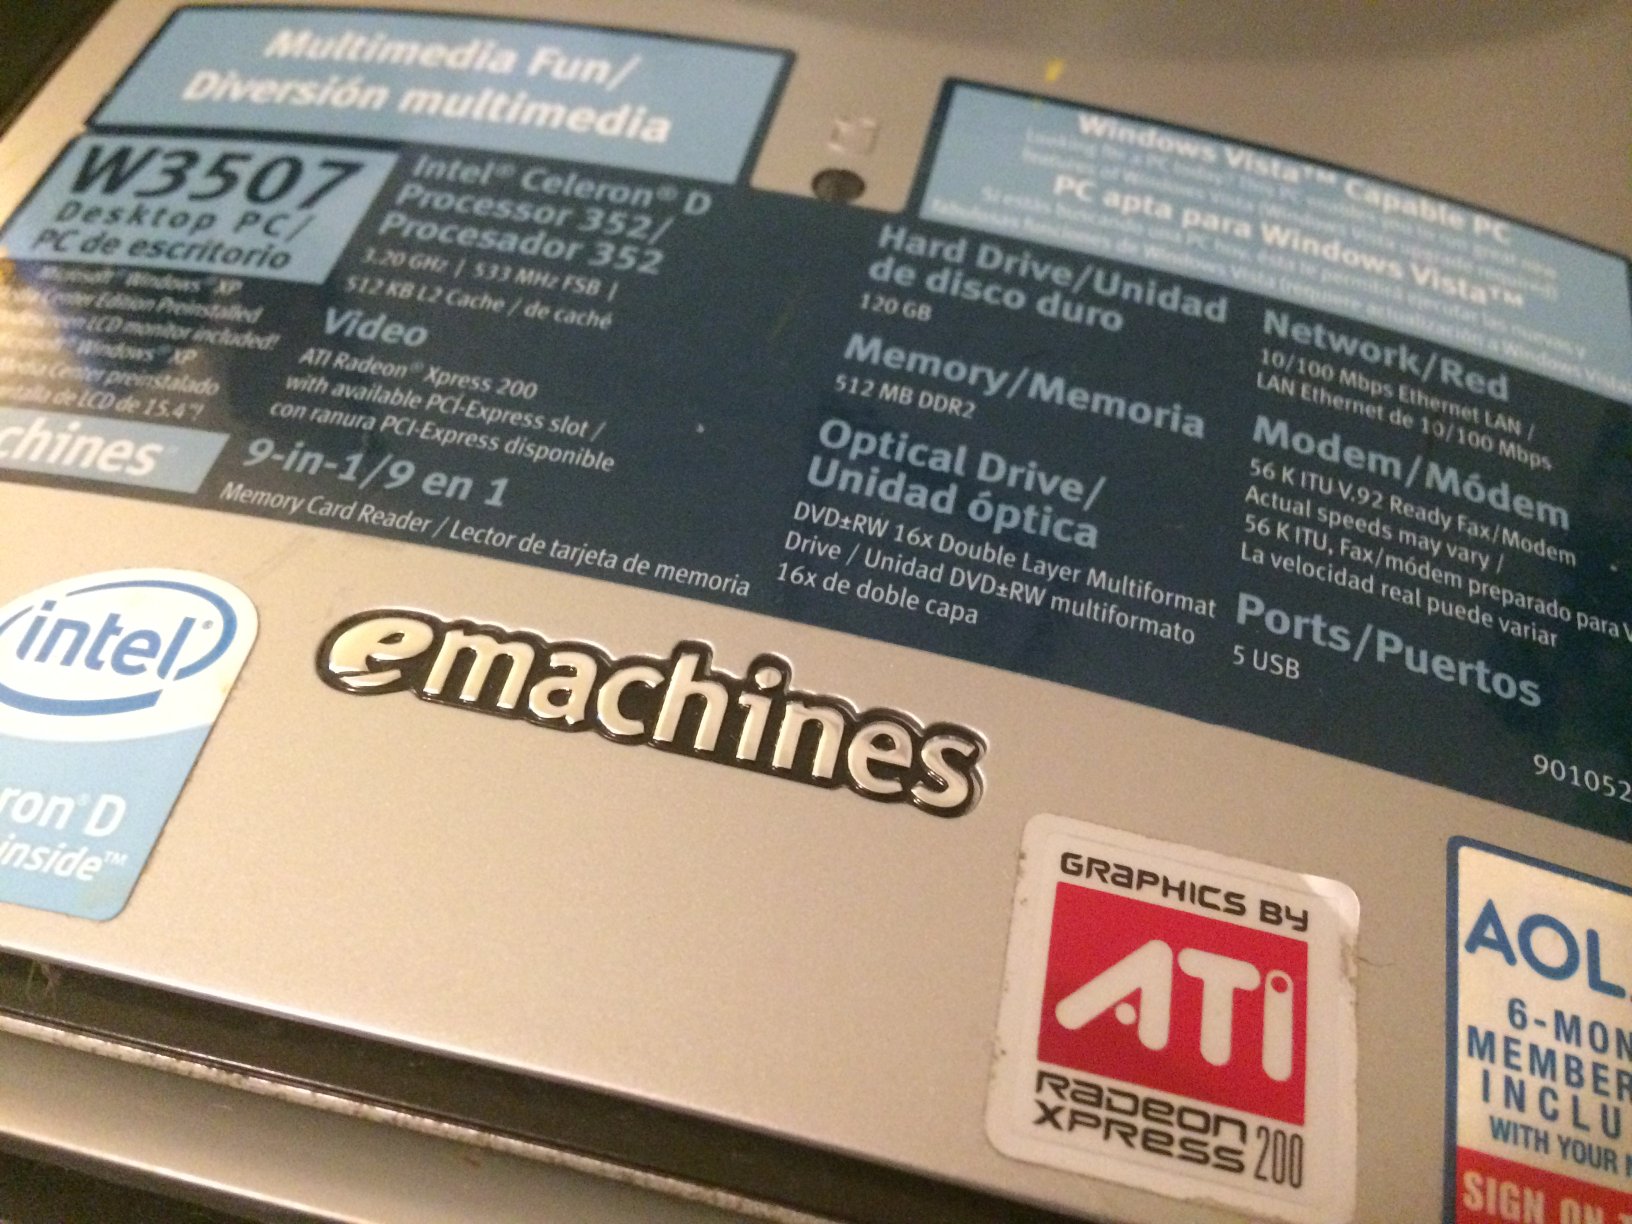 eMachines logo and some specs